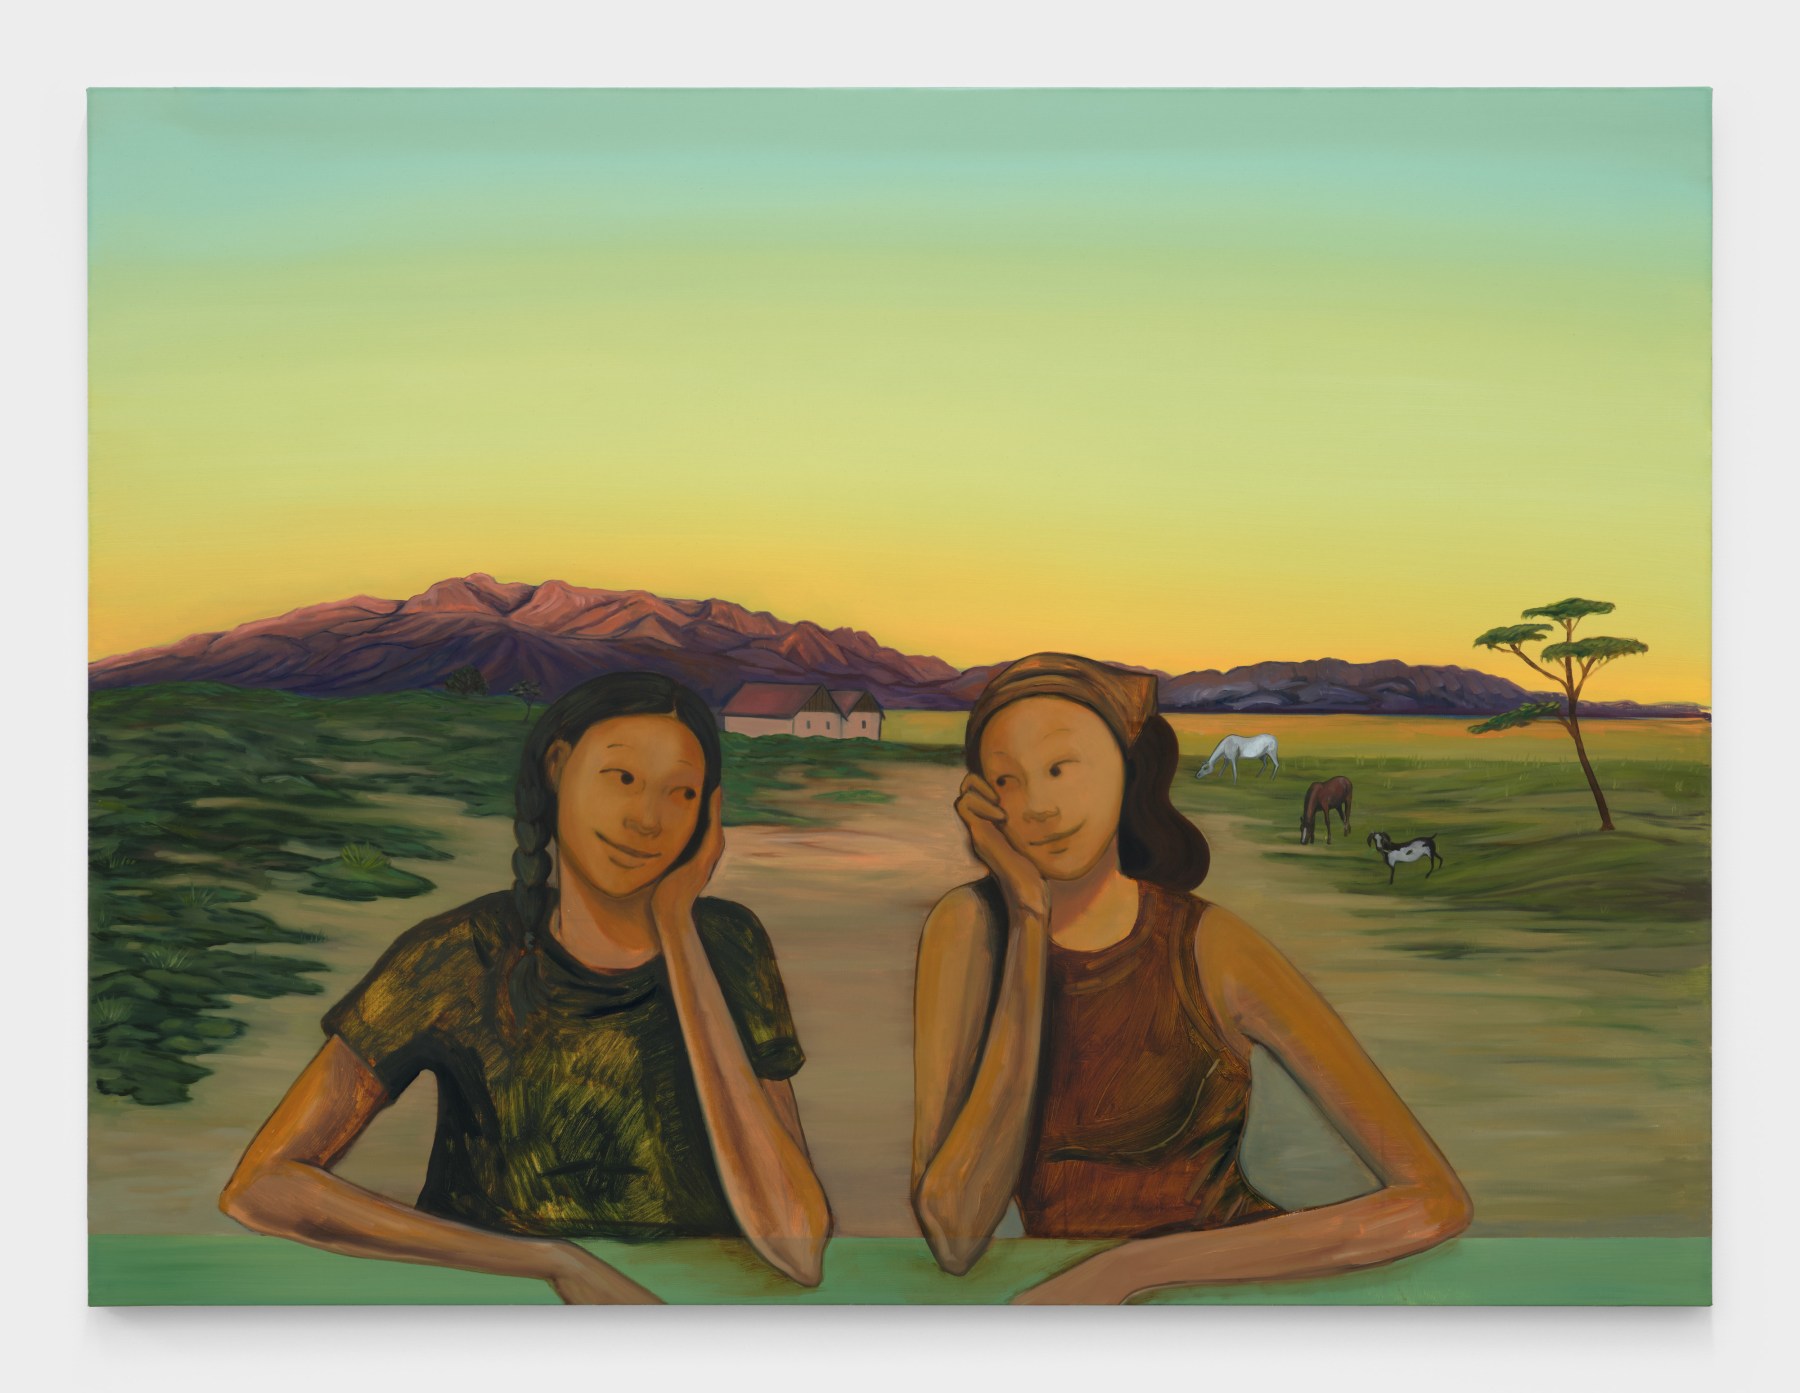 Bambou Gili's artwork "Jam Stand". Two women sit relaxing in a desert field with animals grazing in the background. 36 x 48 in (91.4 x 121.9 cm), oil on linen, 2023